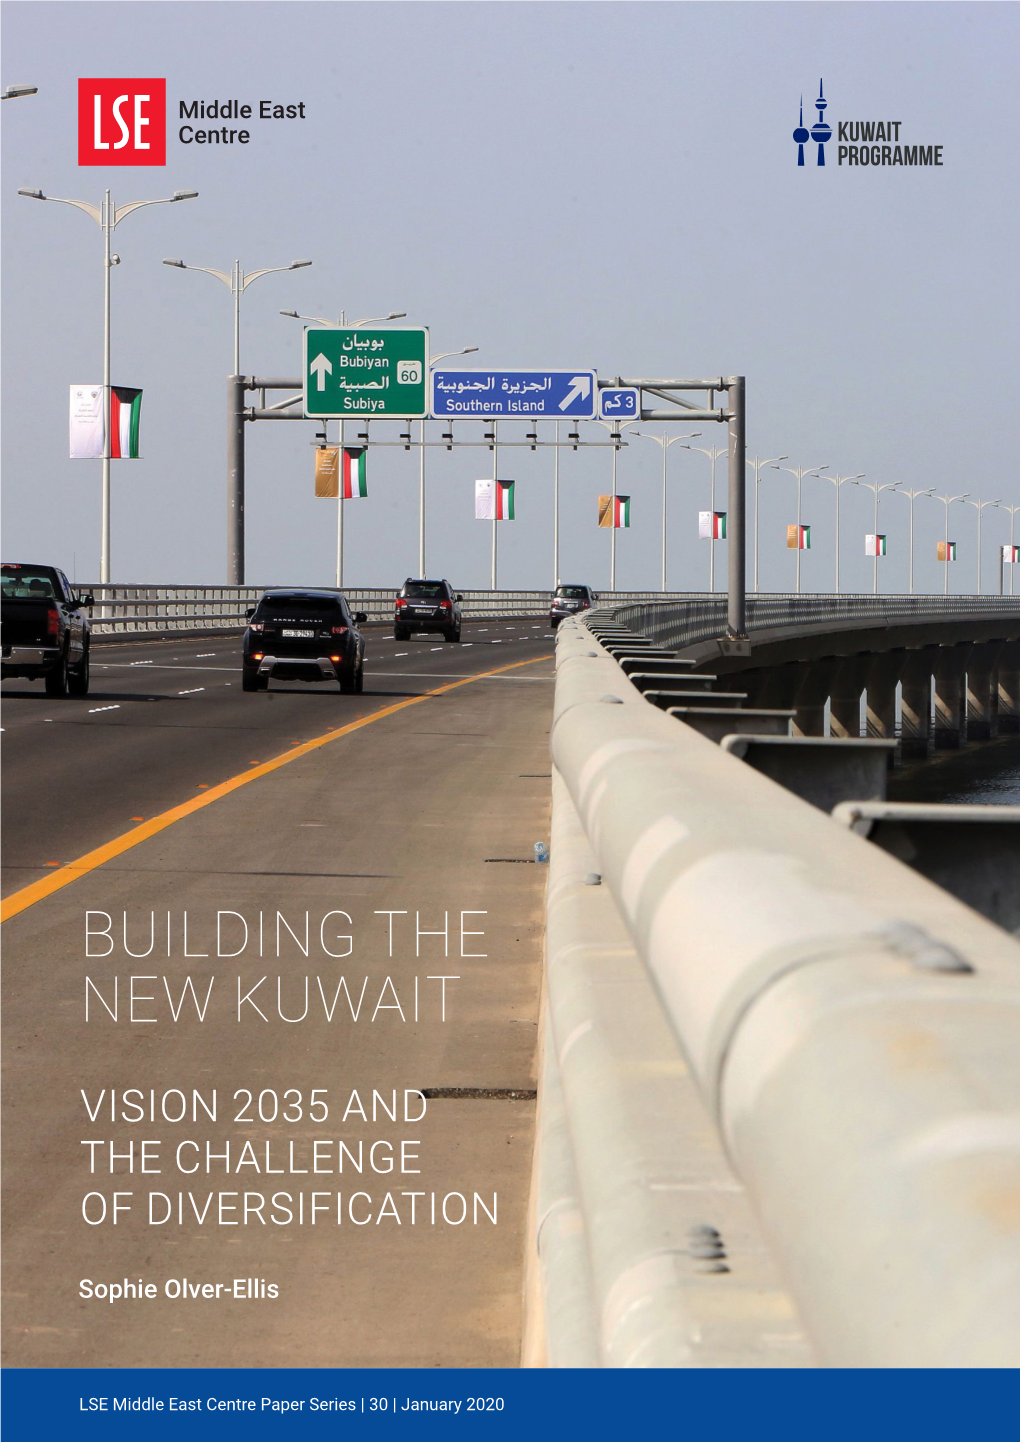 Building the New Kuwait Vision 2035 and The